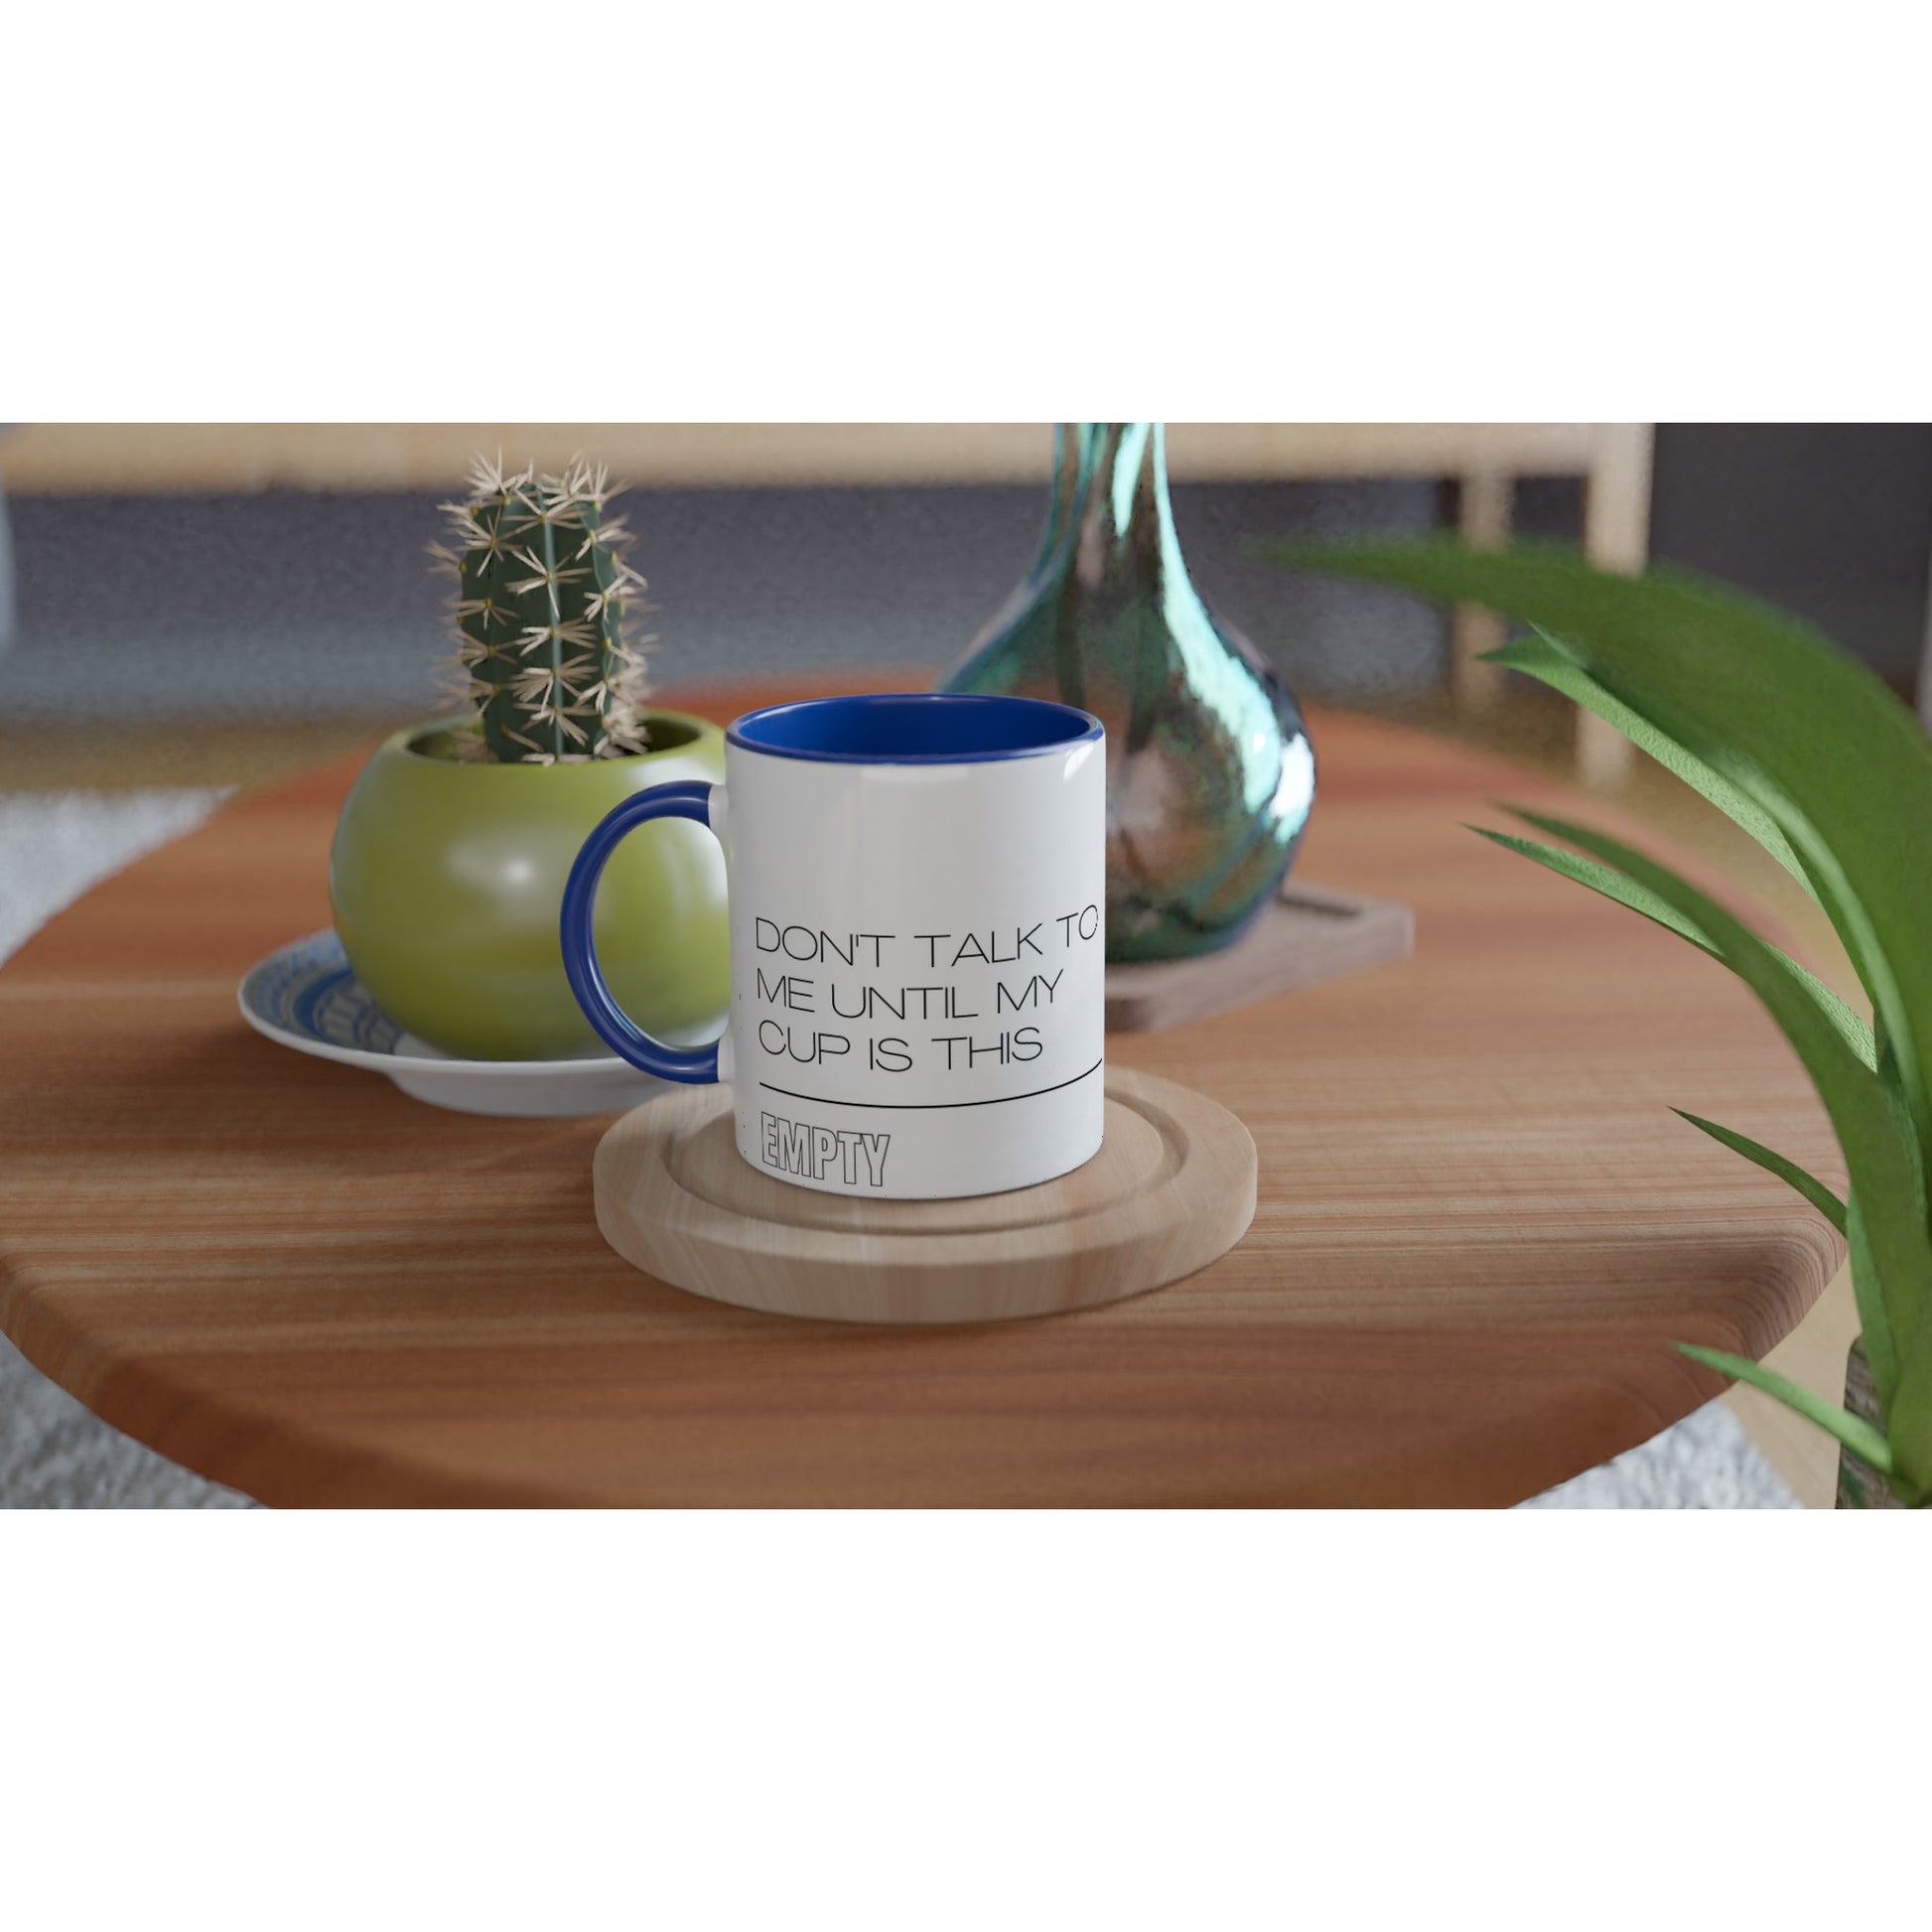 Don't Talk To Me Until My Cup Is This Empty - White 11oz Ceramic Mug with Colour Inside Colour 11oz Mug Coffee Funny